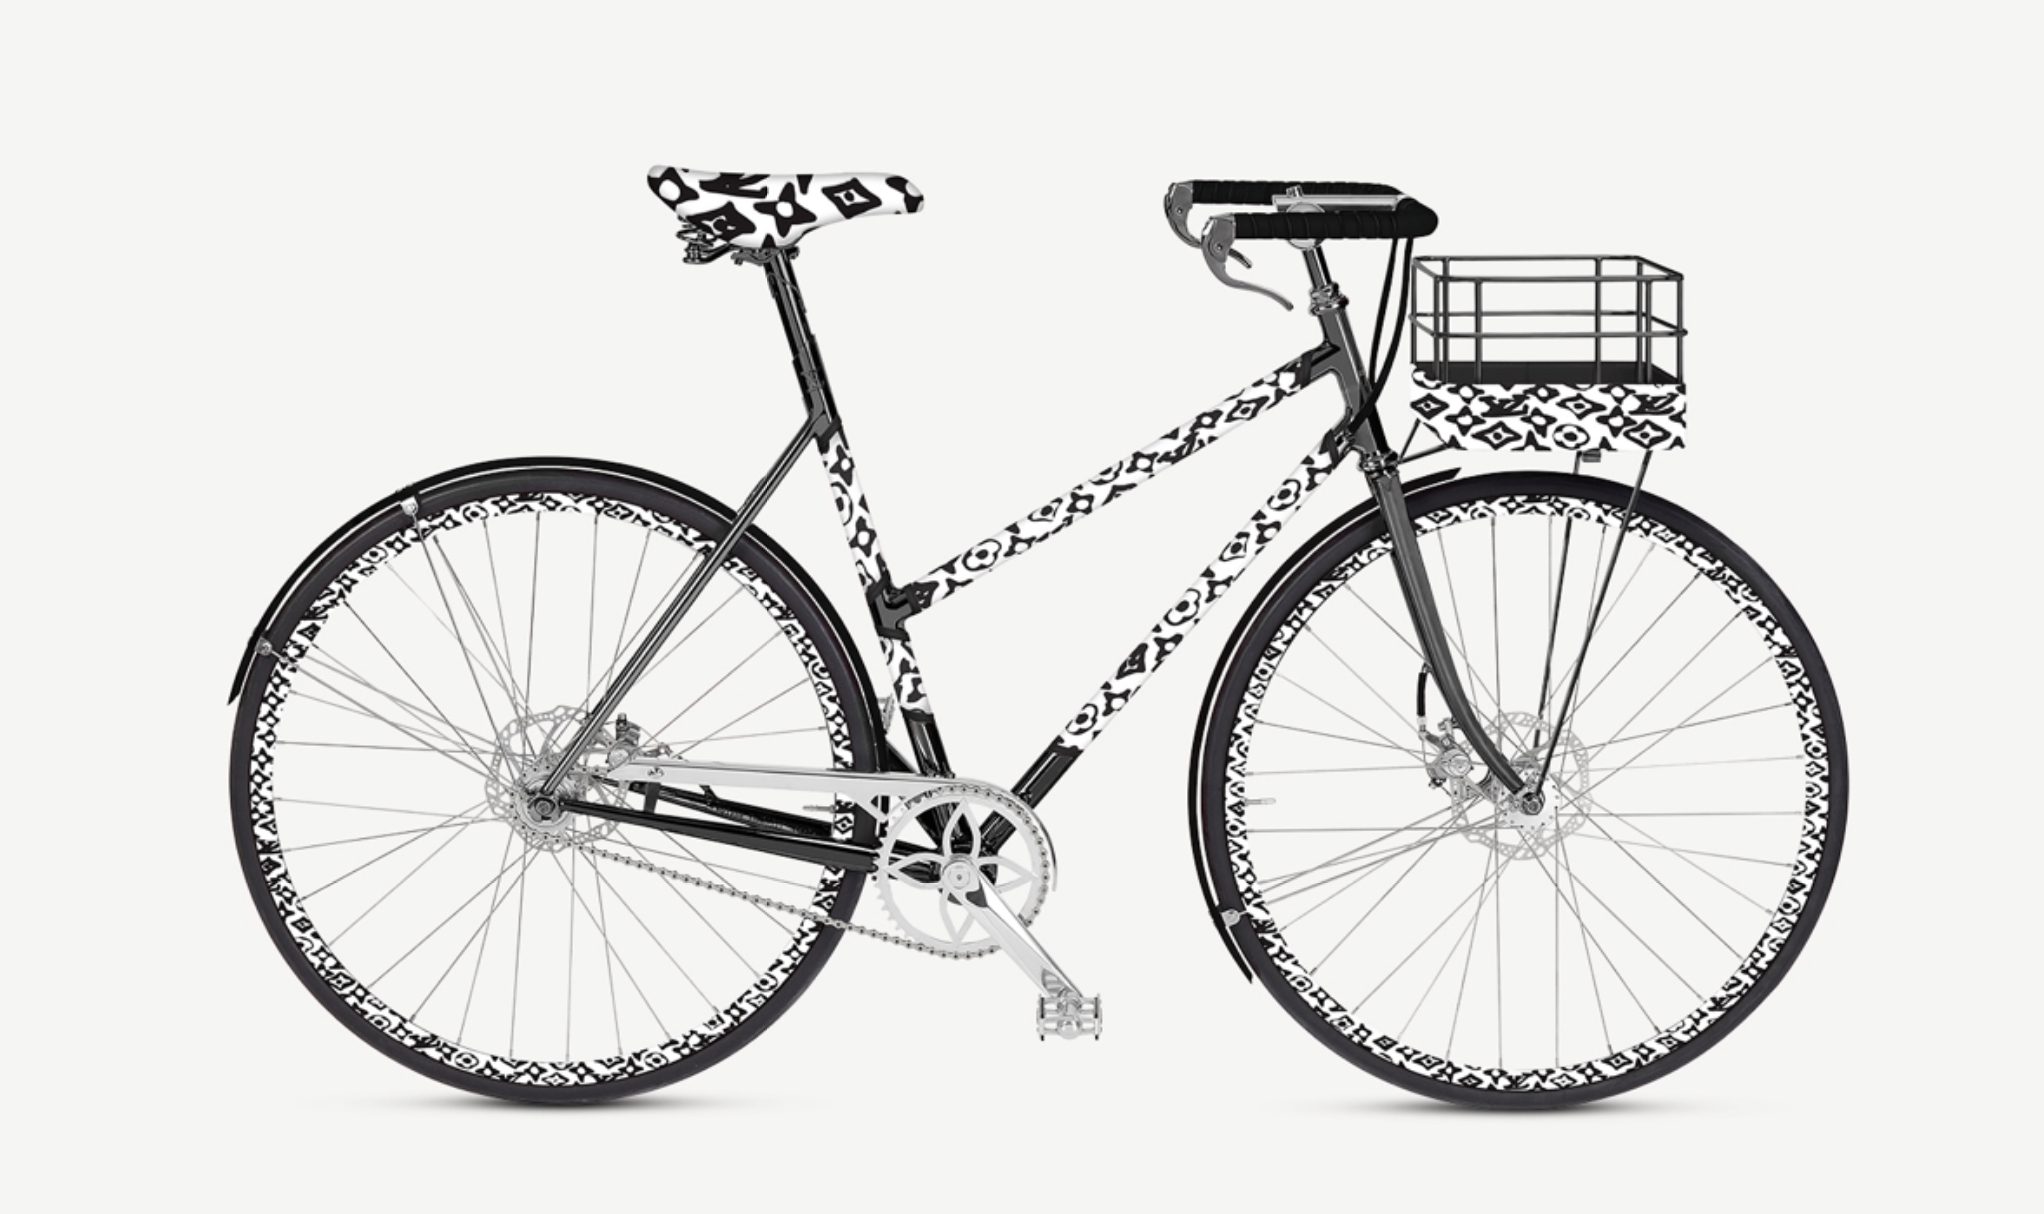 Louis Vuitton teams up with Maison Tamboite for a monogramed bicycle line –  Garage